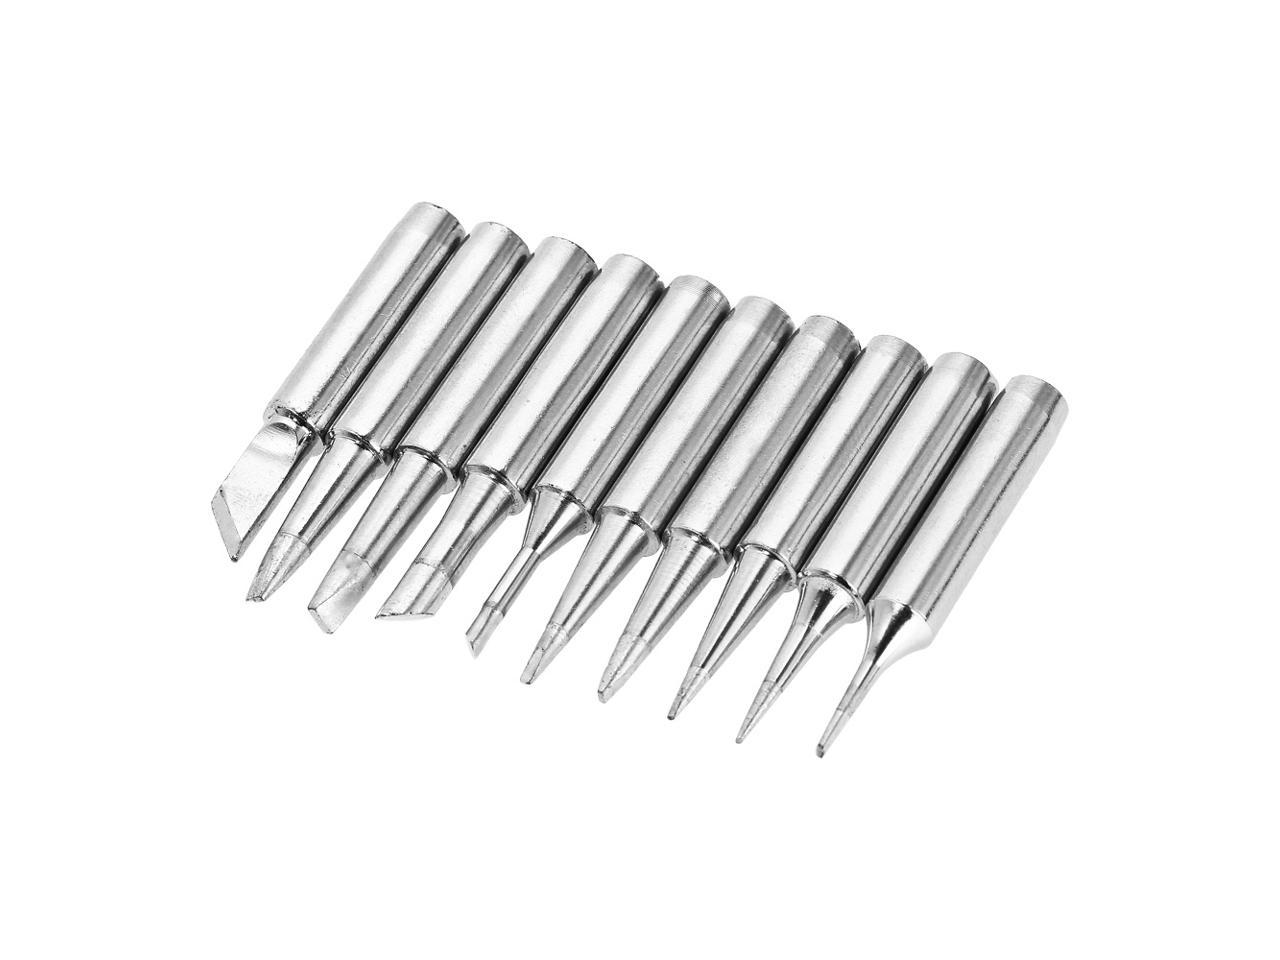 10 PCS Soldering Iron Tips 900M-T-B Replacement Tips Solder Tips for 936,937,938